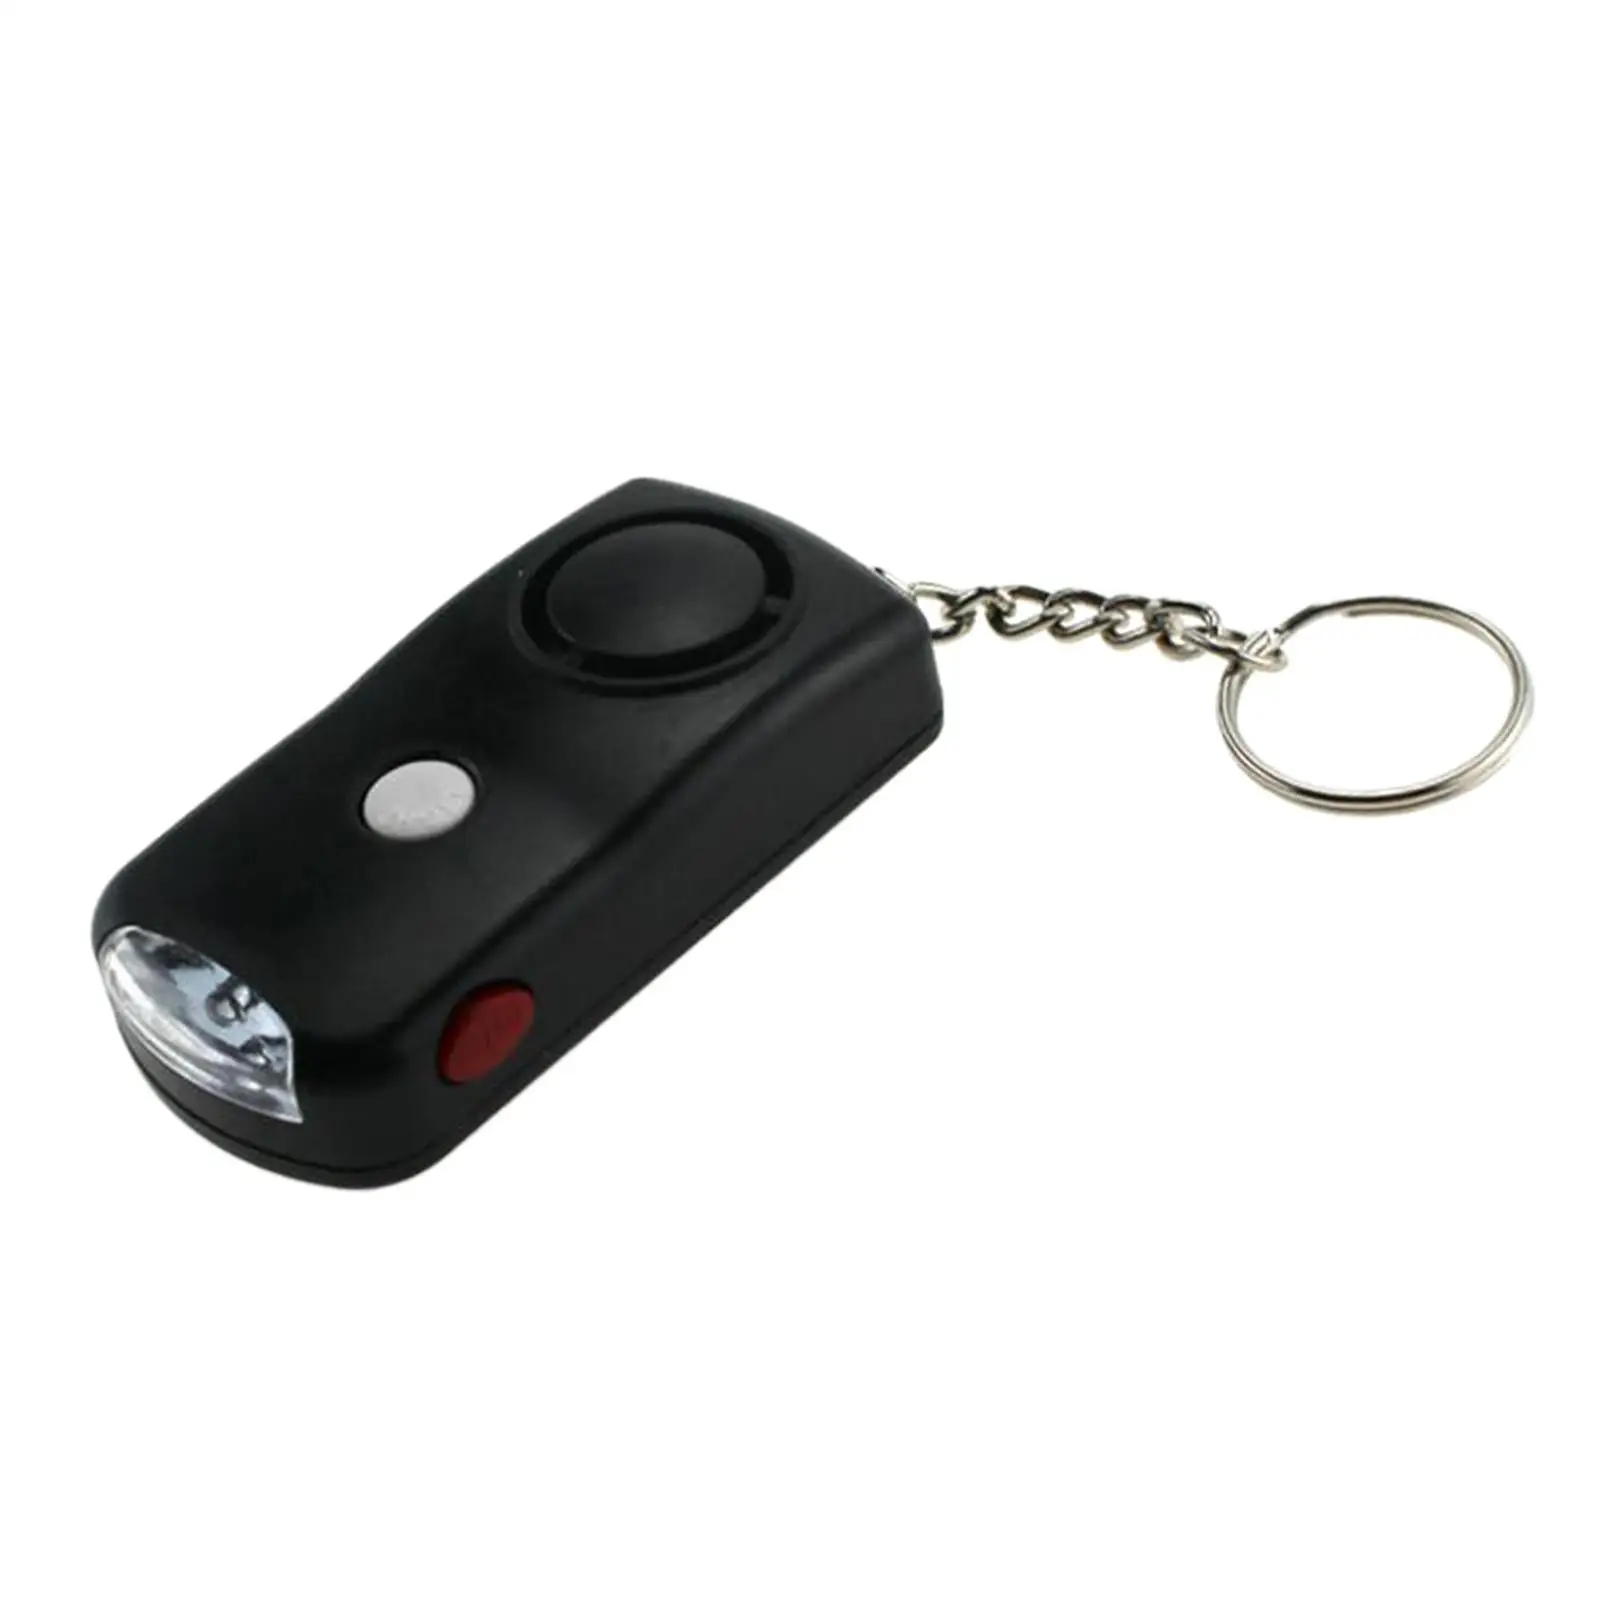 Personal Alarm Keychain Keychain Alarm Security Personal Protection Device with LED Light for Women Men Emergency LED Flashlight